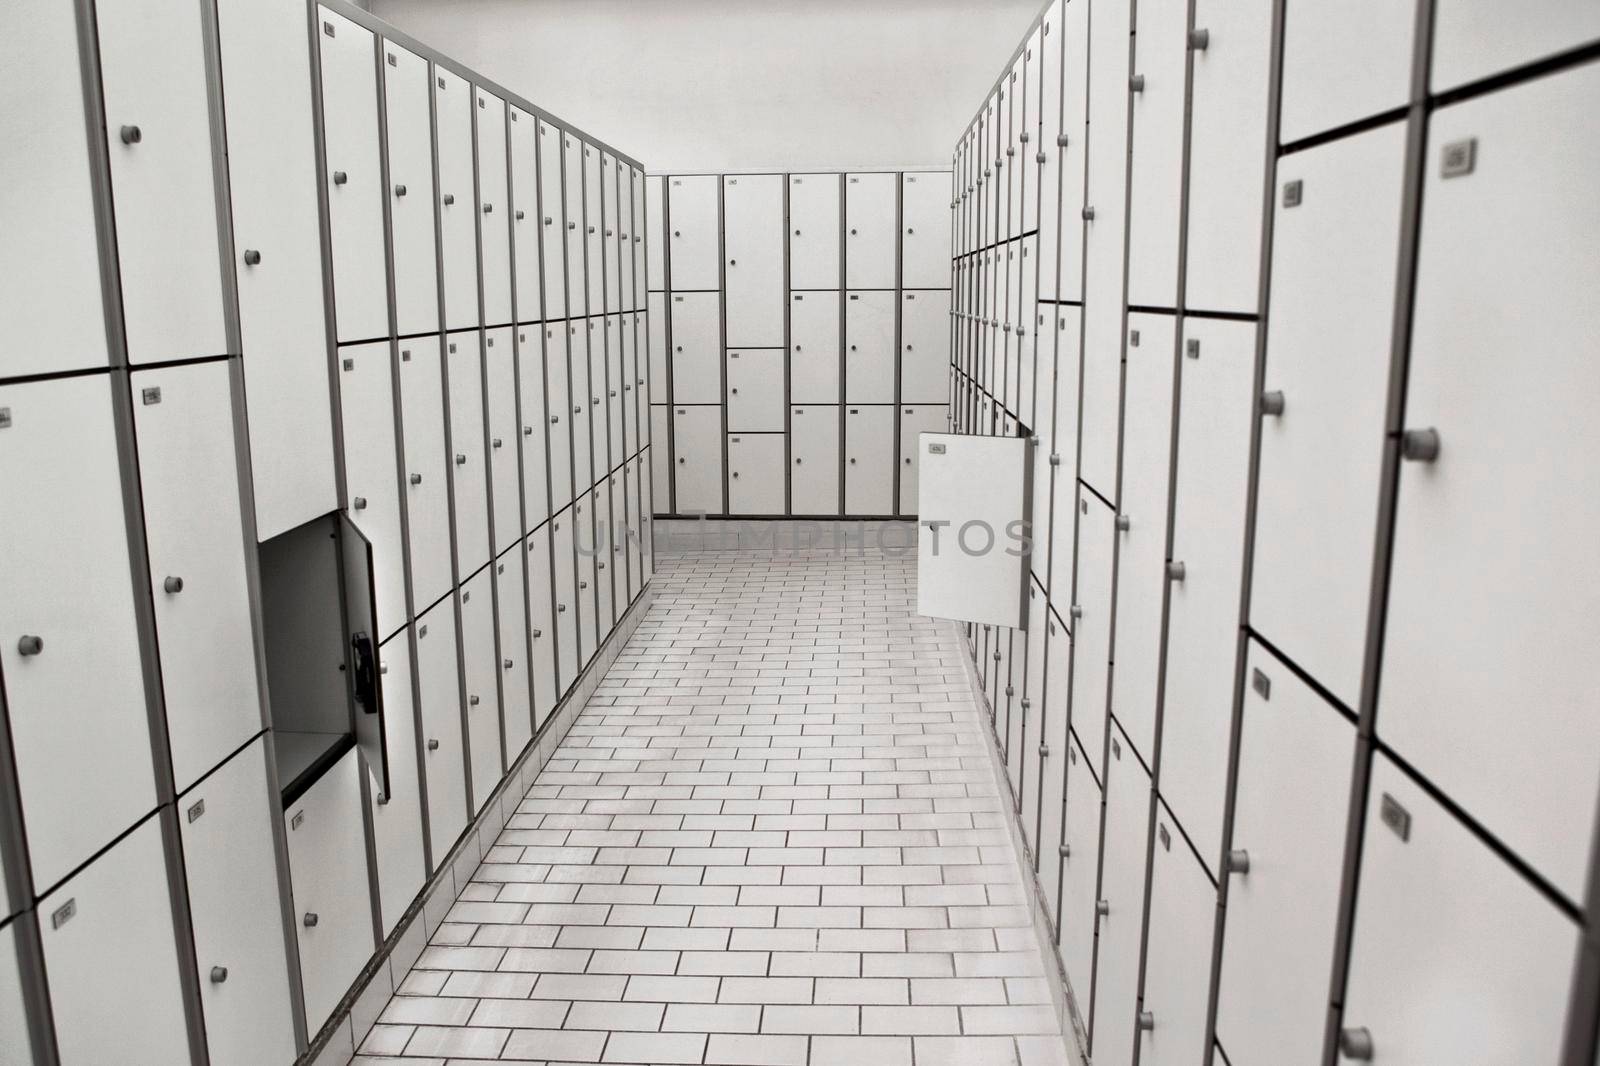 Wardrobes and lockers in the changing room of a swimming pool